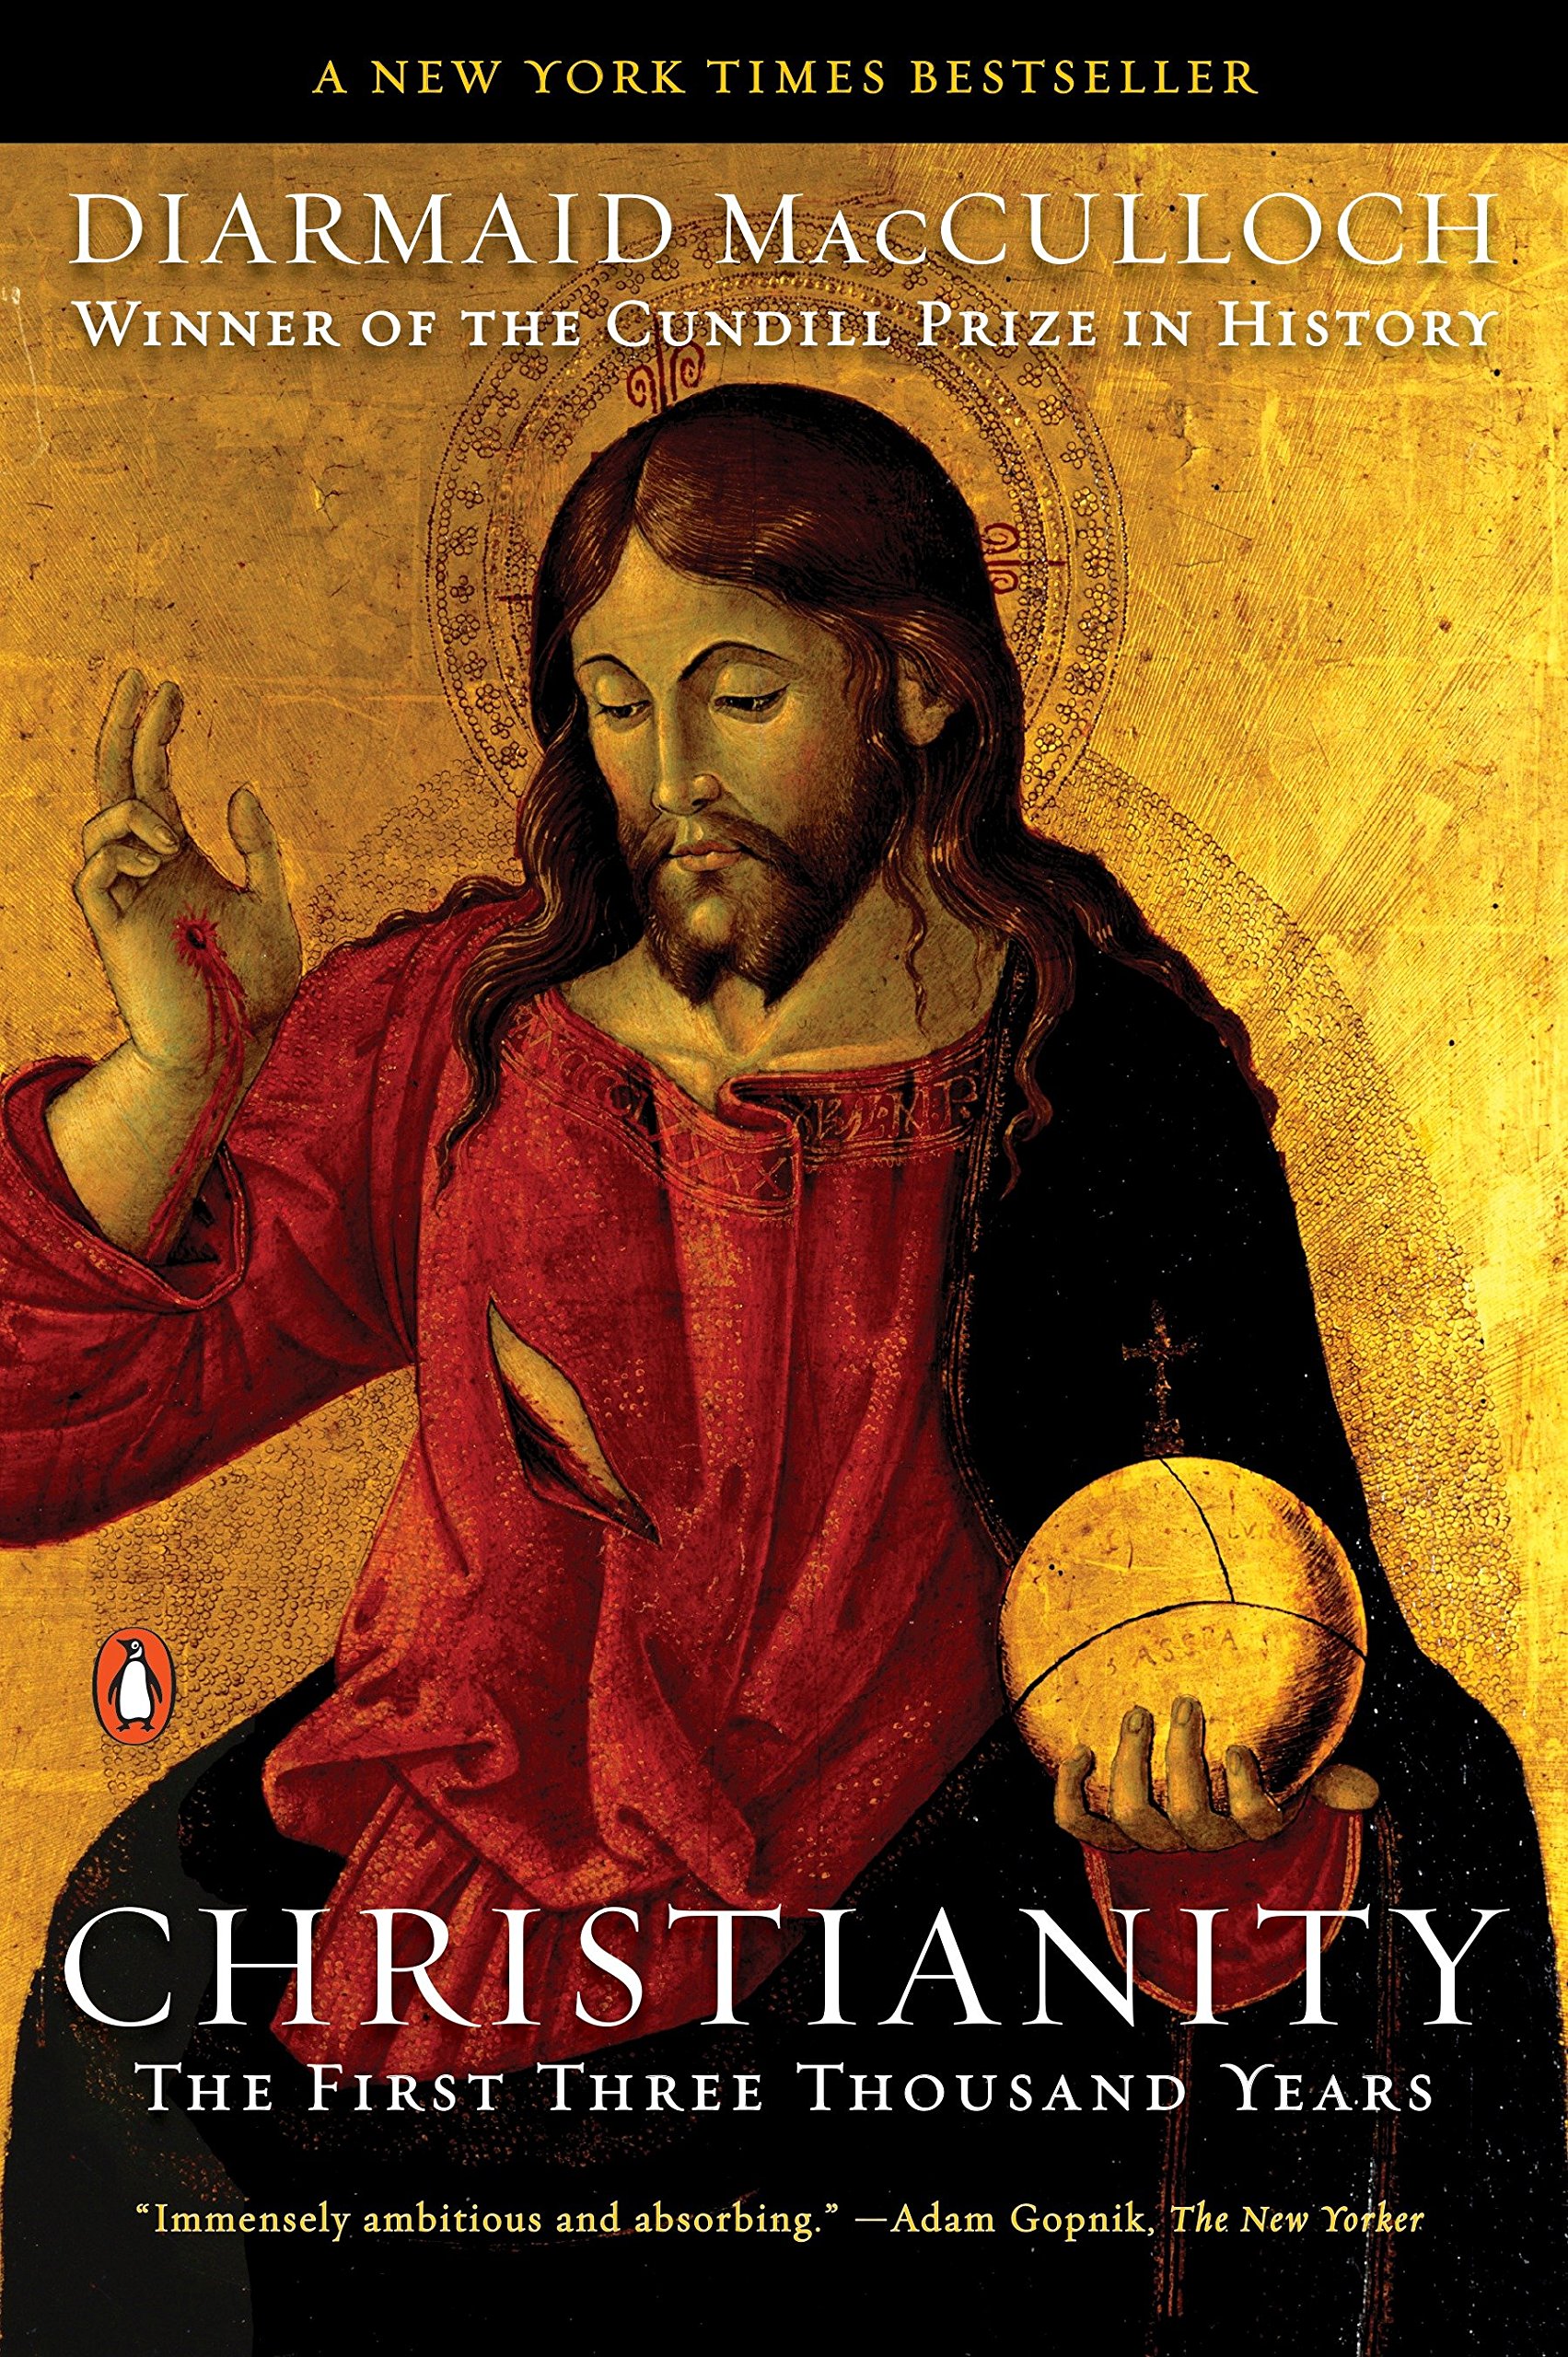 A History of Christianity: The First Three Thousand Years